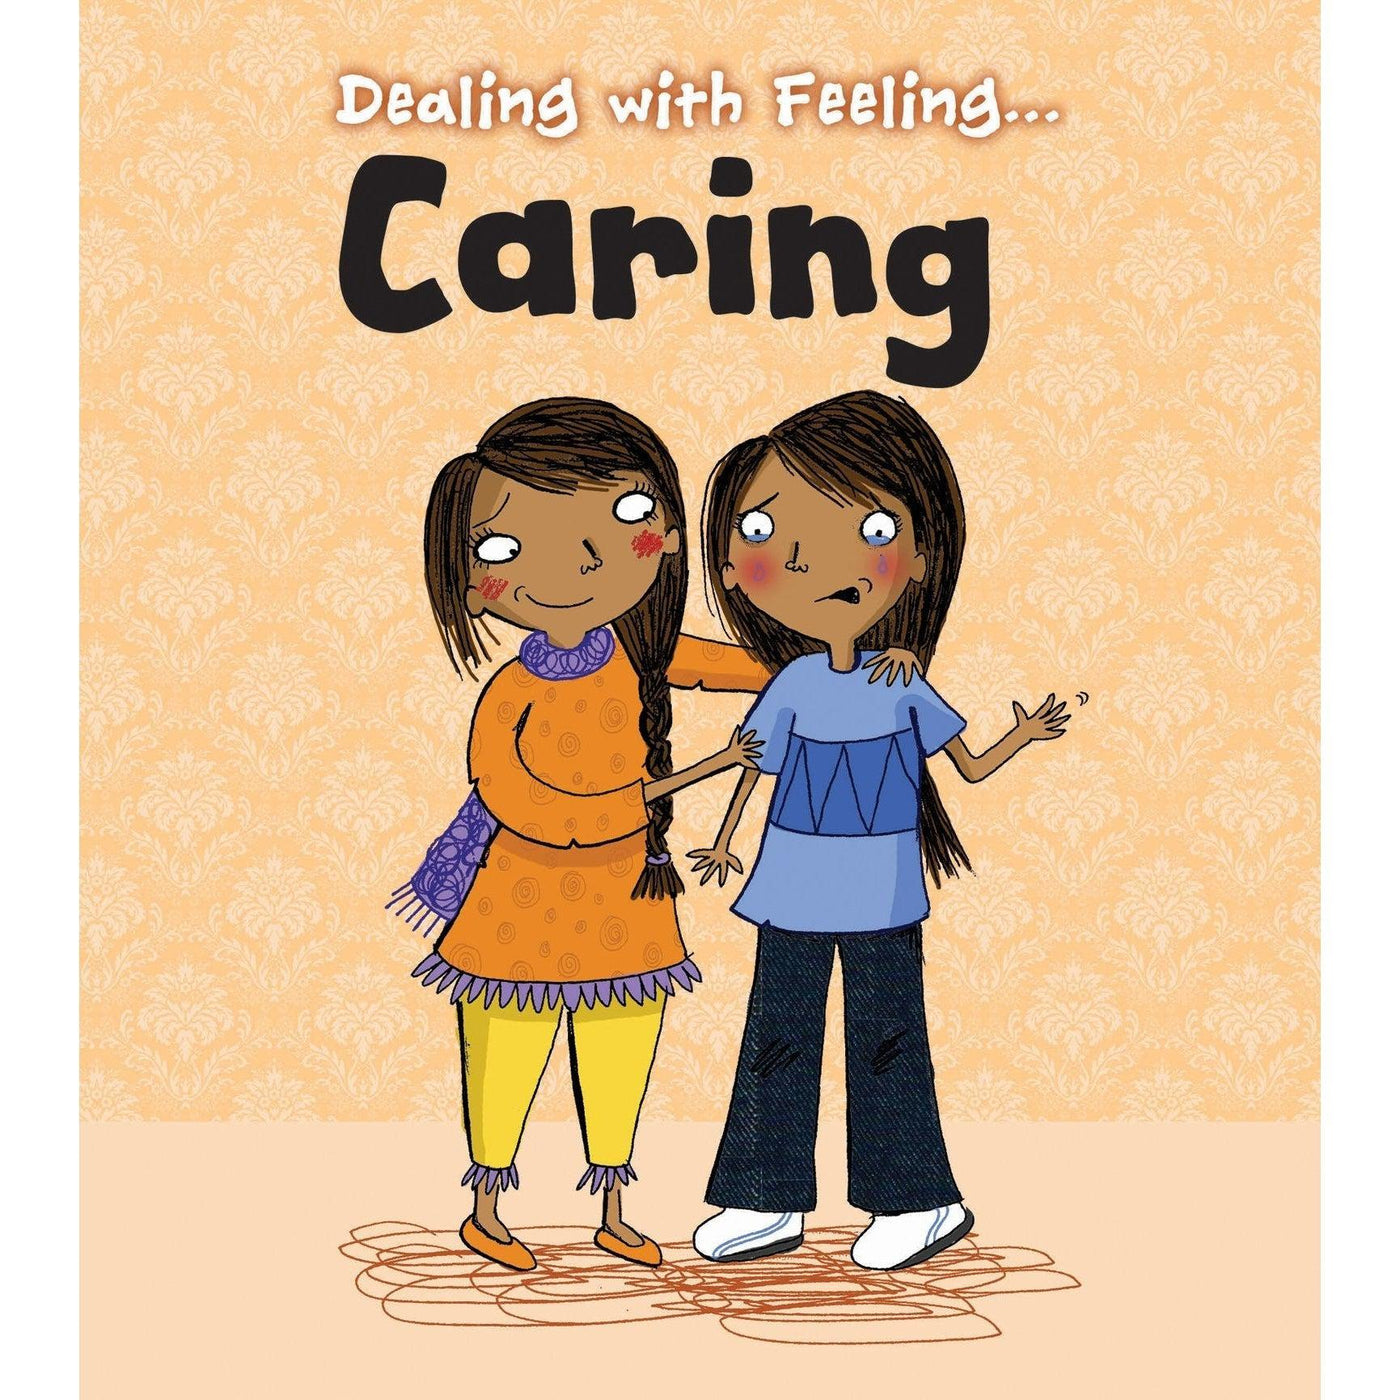 Caring - Isabel Thomas & Clare Elsom